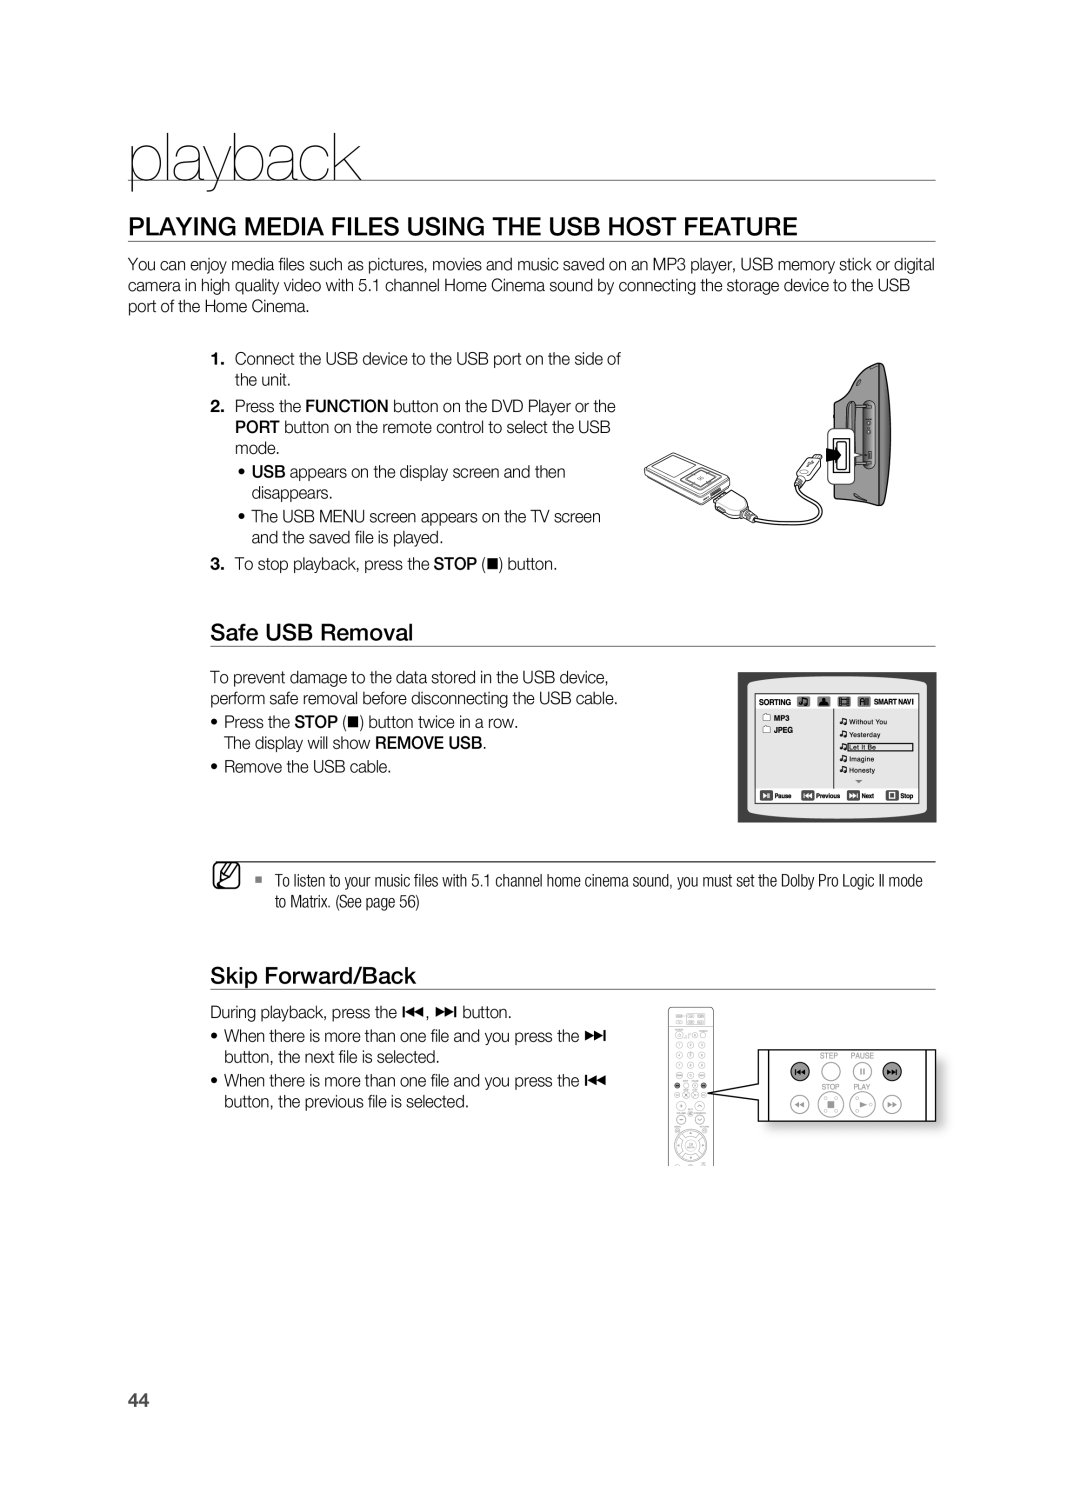 Samsung HT-TX715 user manual PLAYING MEDIA FILES USING THE USB HOST FEATUrE, playback, Safe USB removal, Skip Forward/Back 